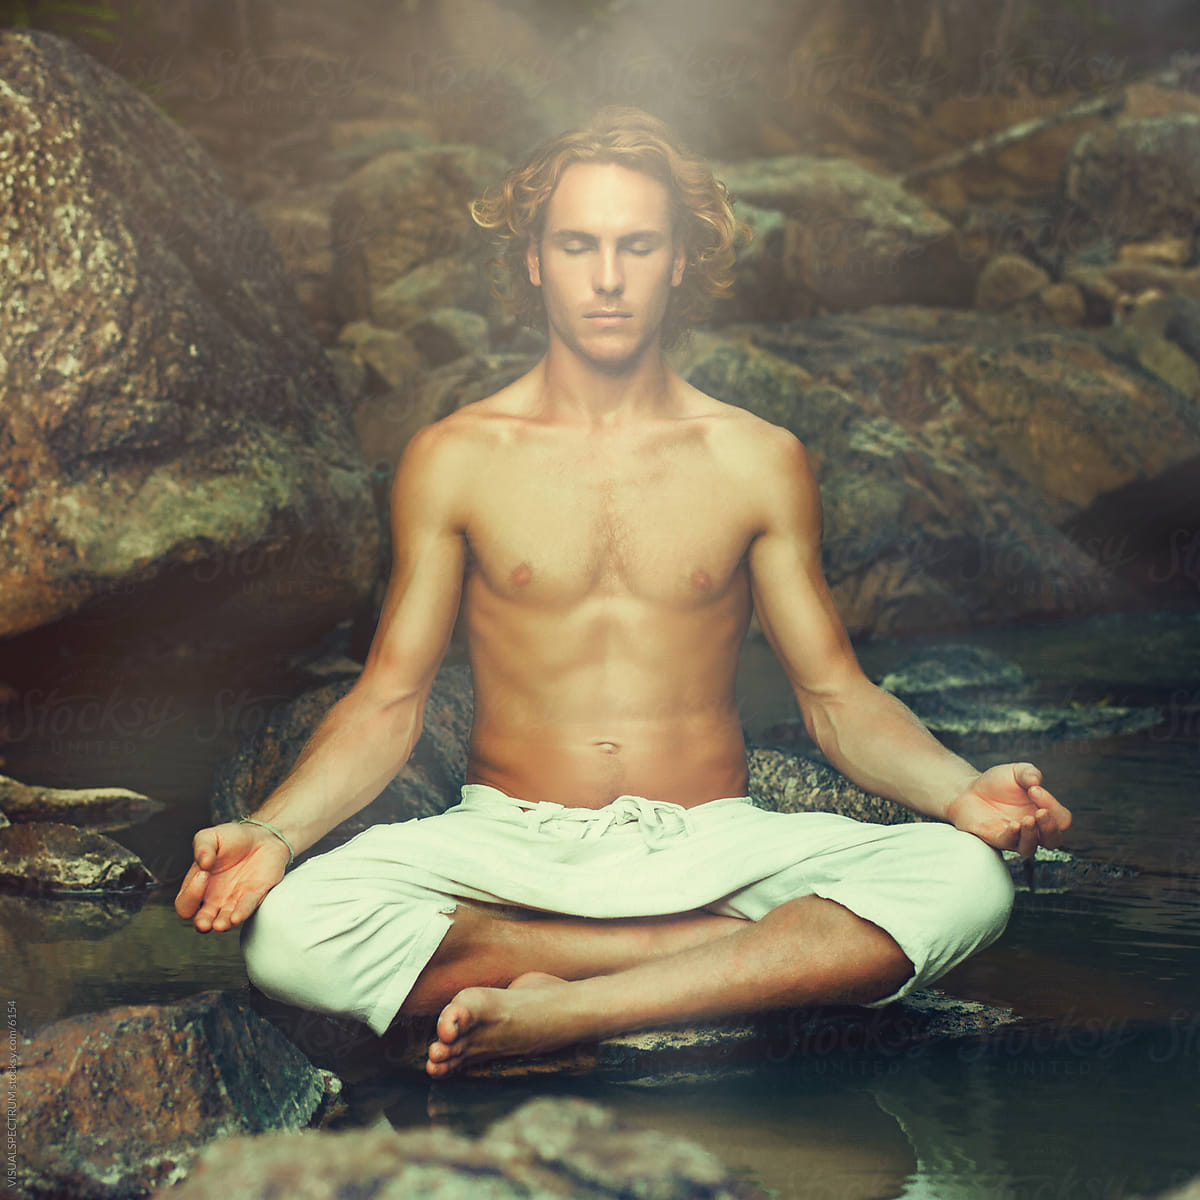 Young Handsome Man in Meditation